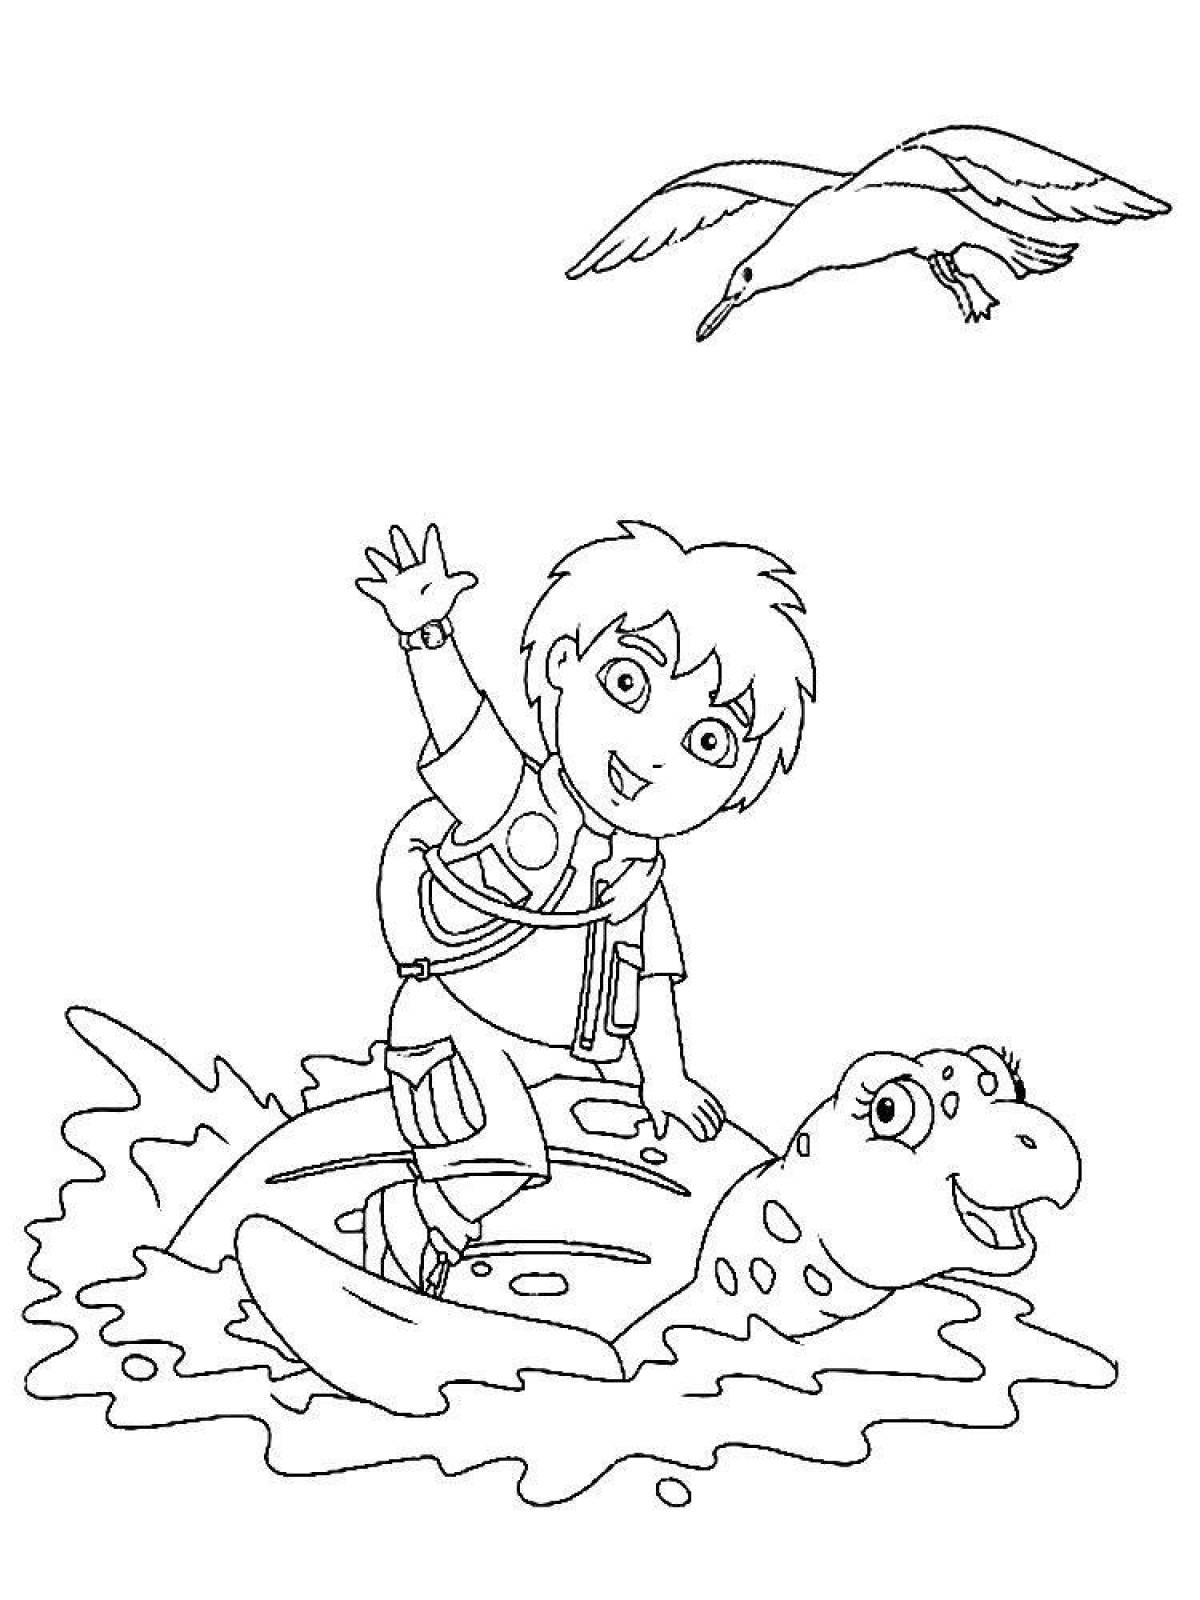 Diego Go colorful coloring page